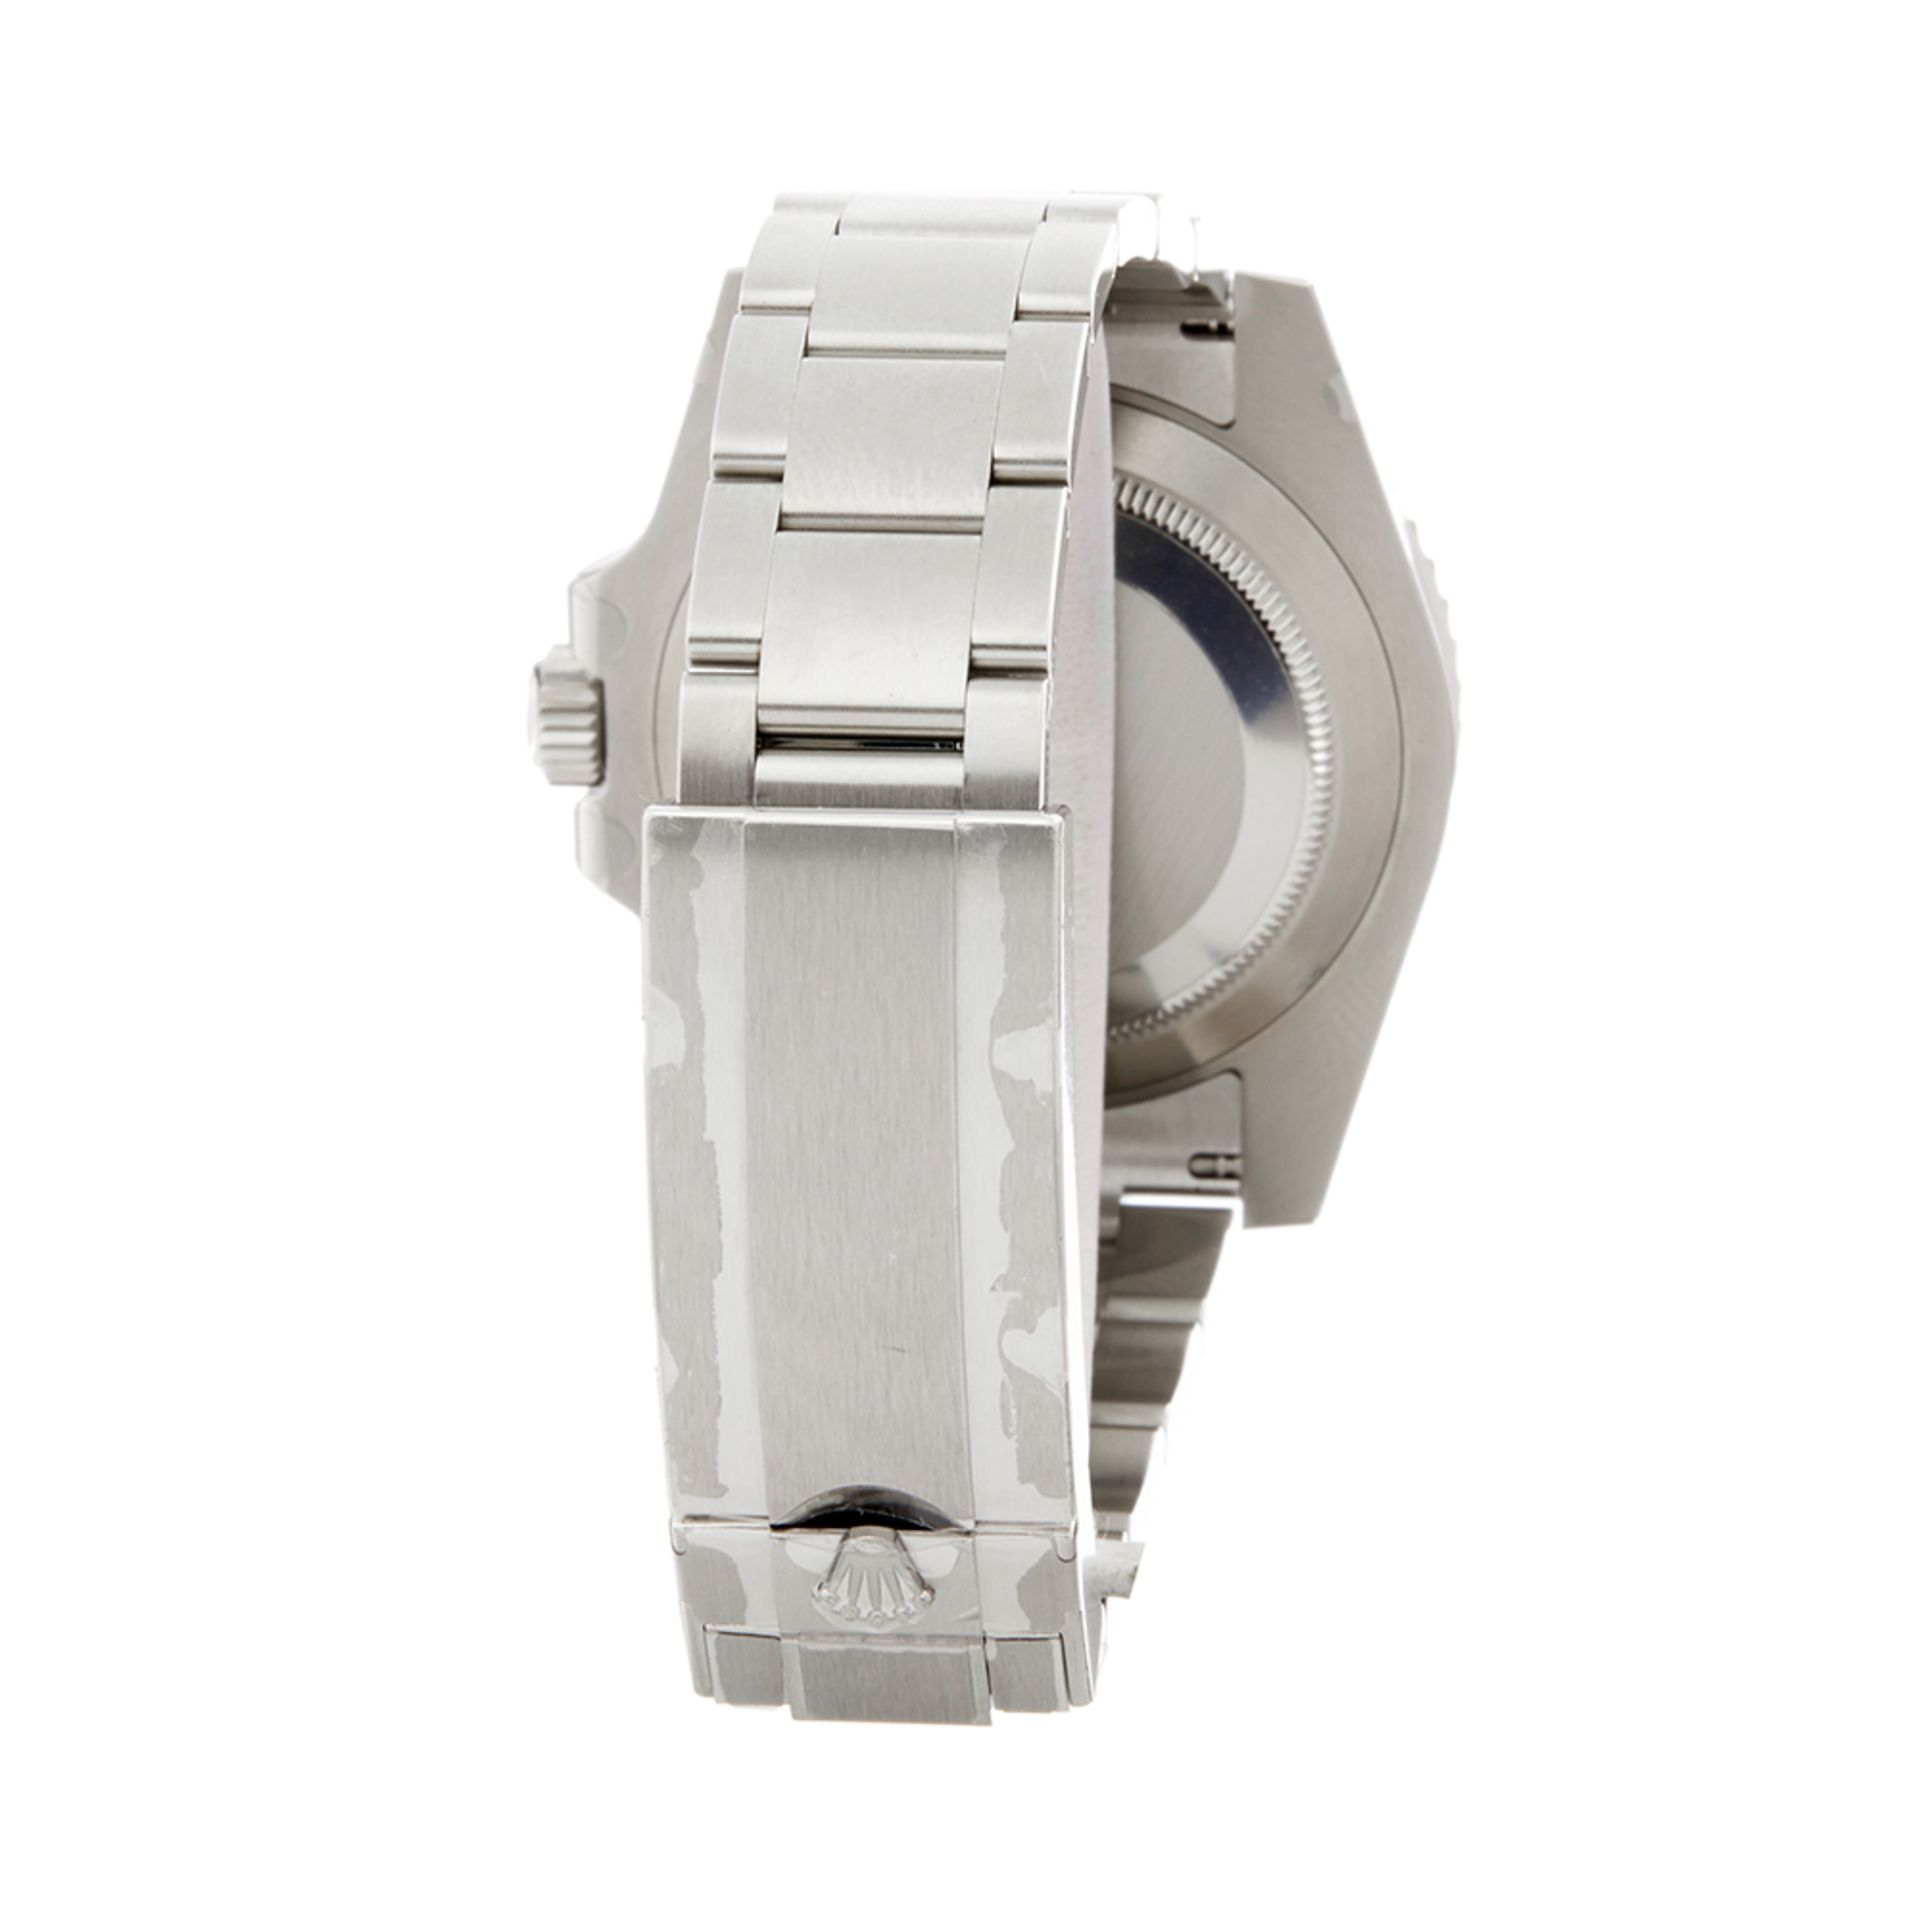 Rolex Submariner Stainless Steel - 116610LN - Image 6 of 7